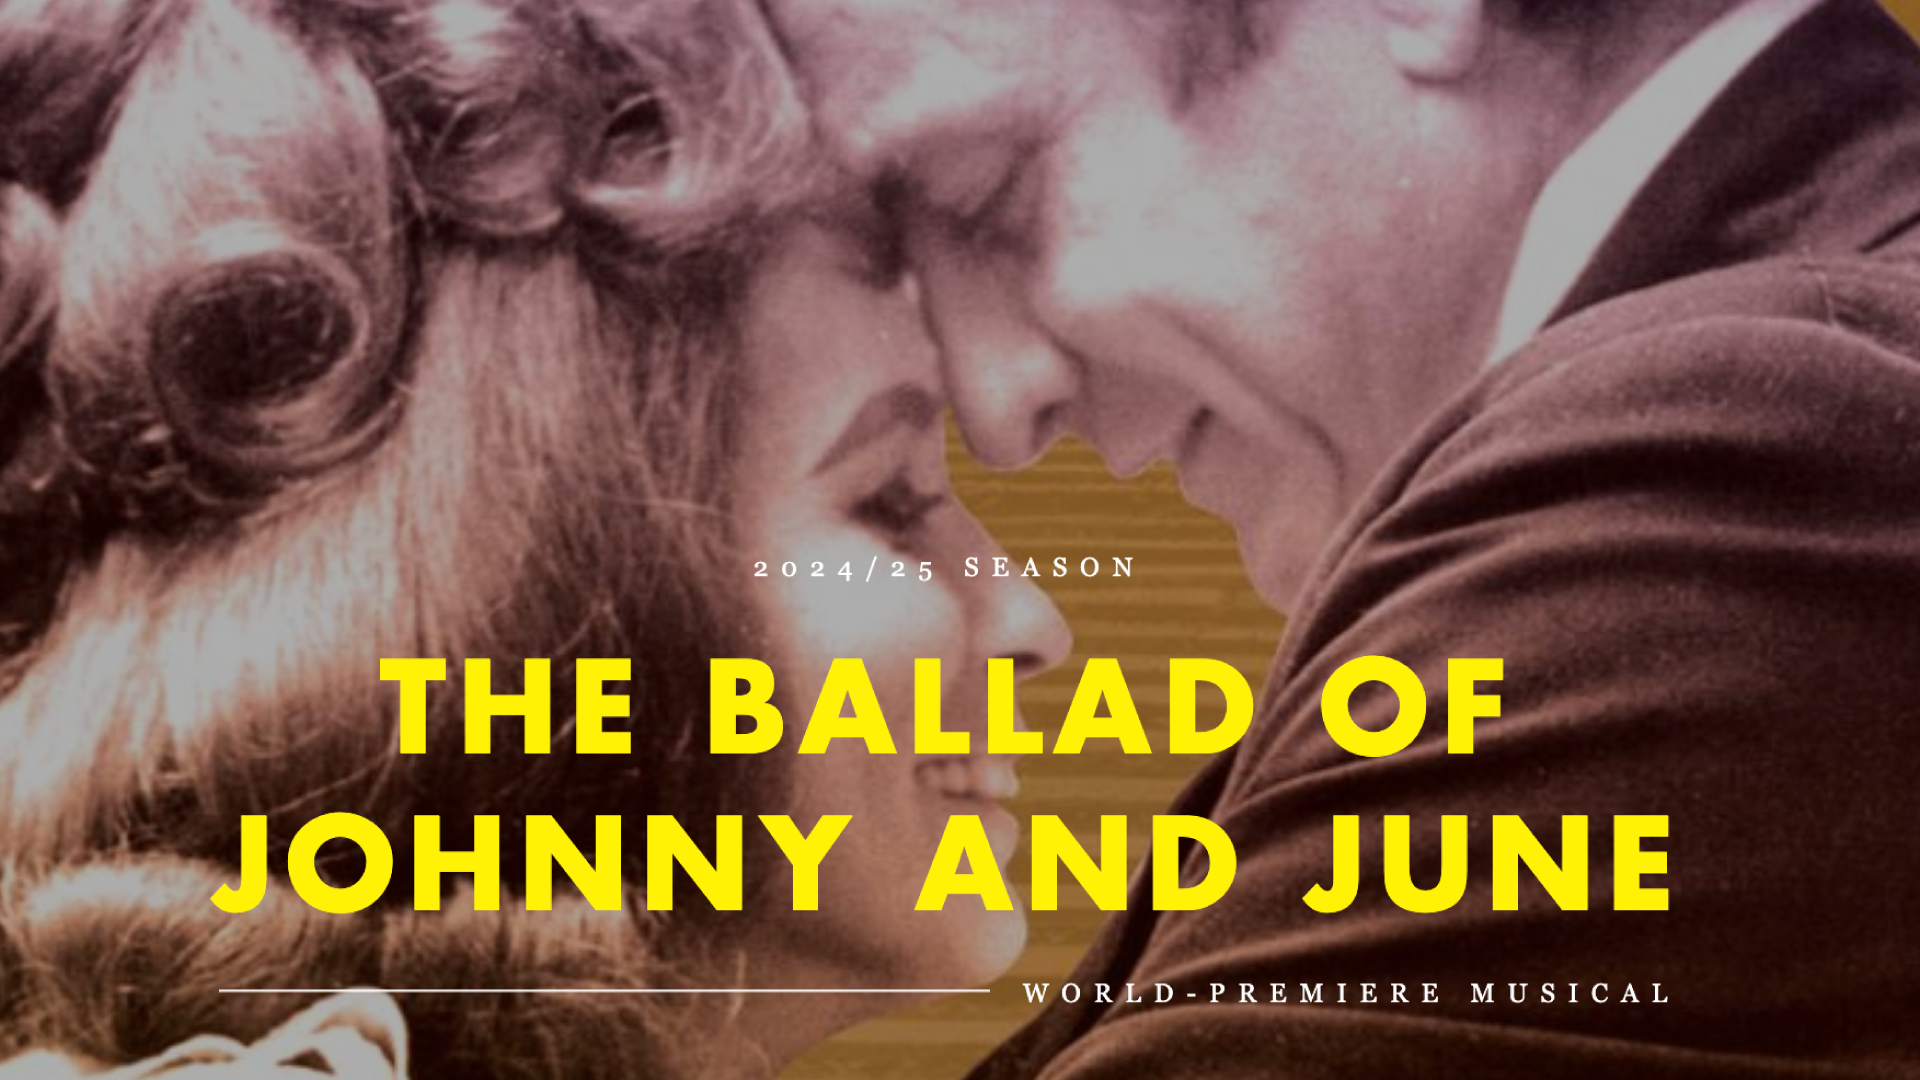 The Ballad of Johnny and June